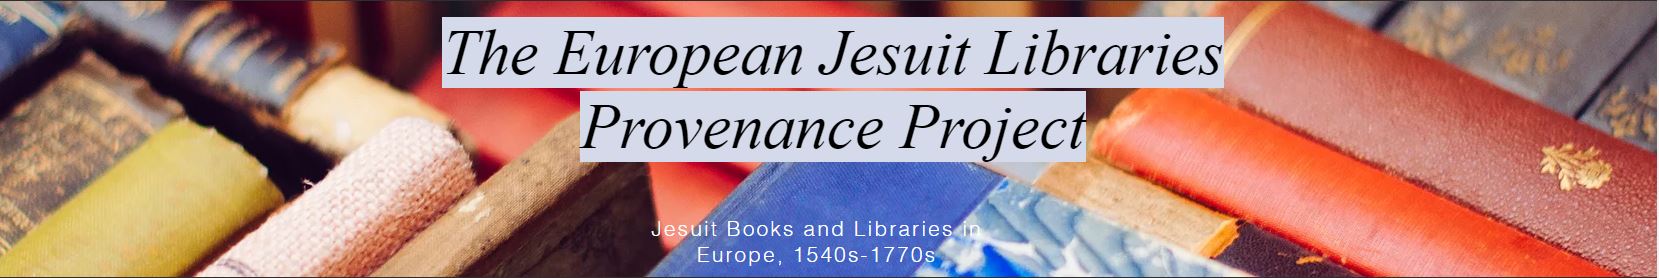 European Jesuit Libraries Provenance Images (Indexed by Book Title)